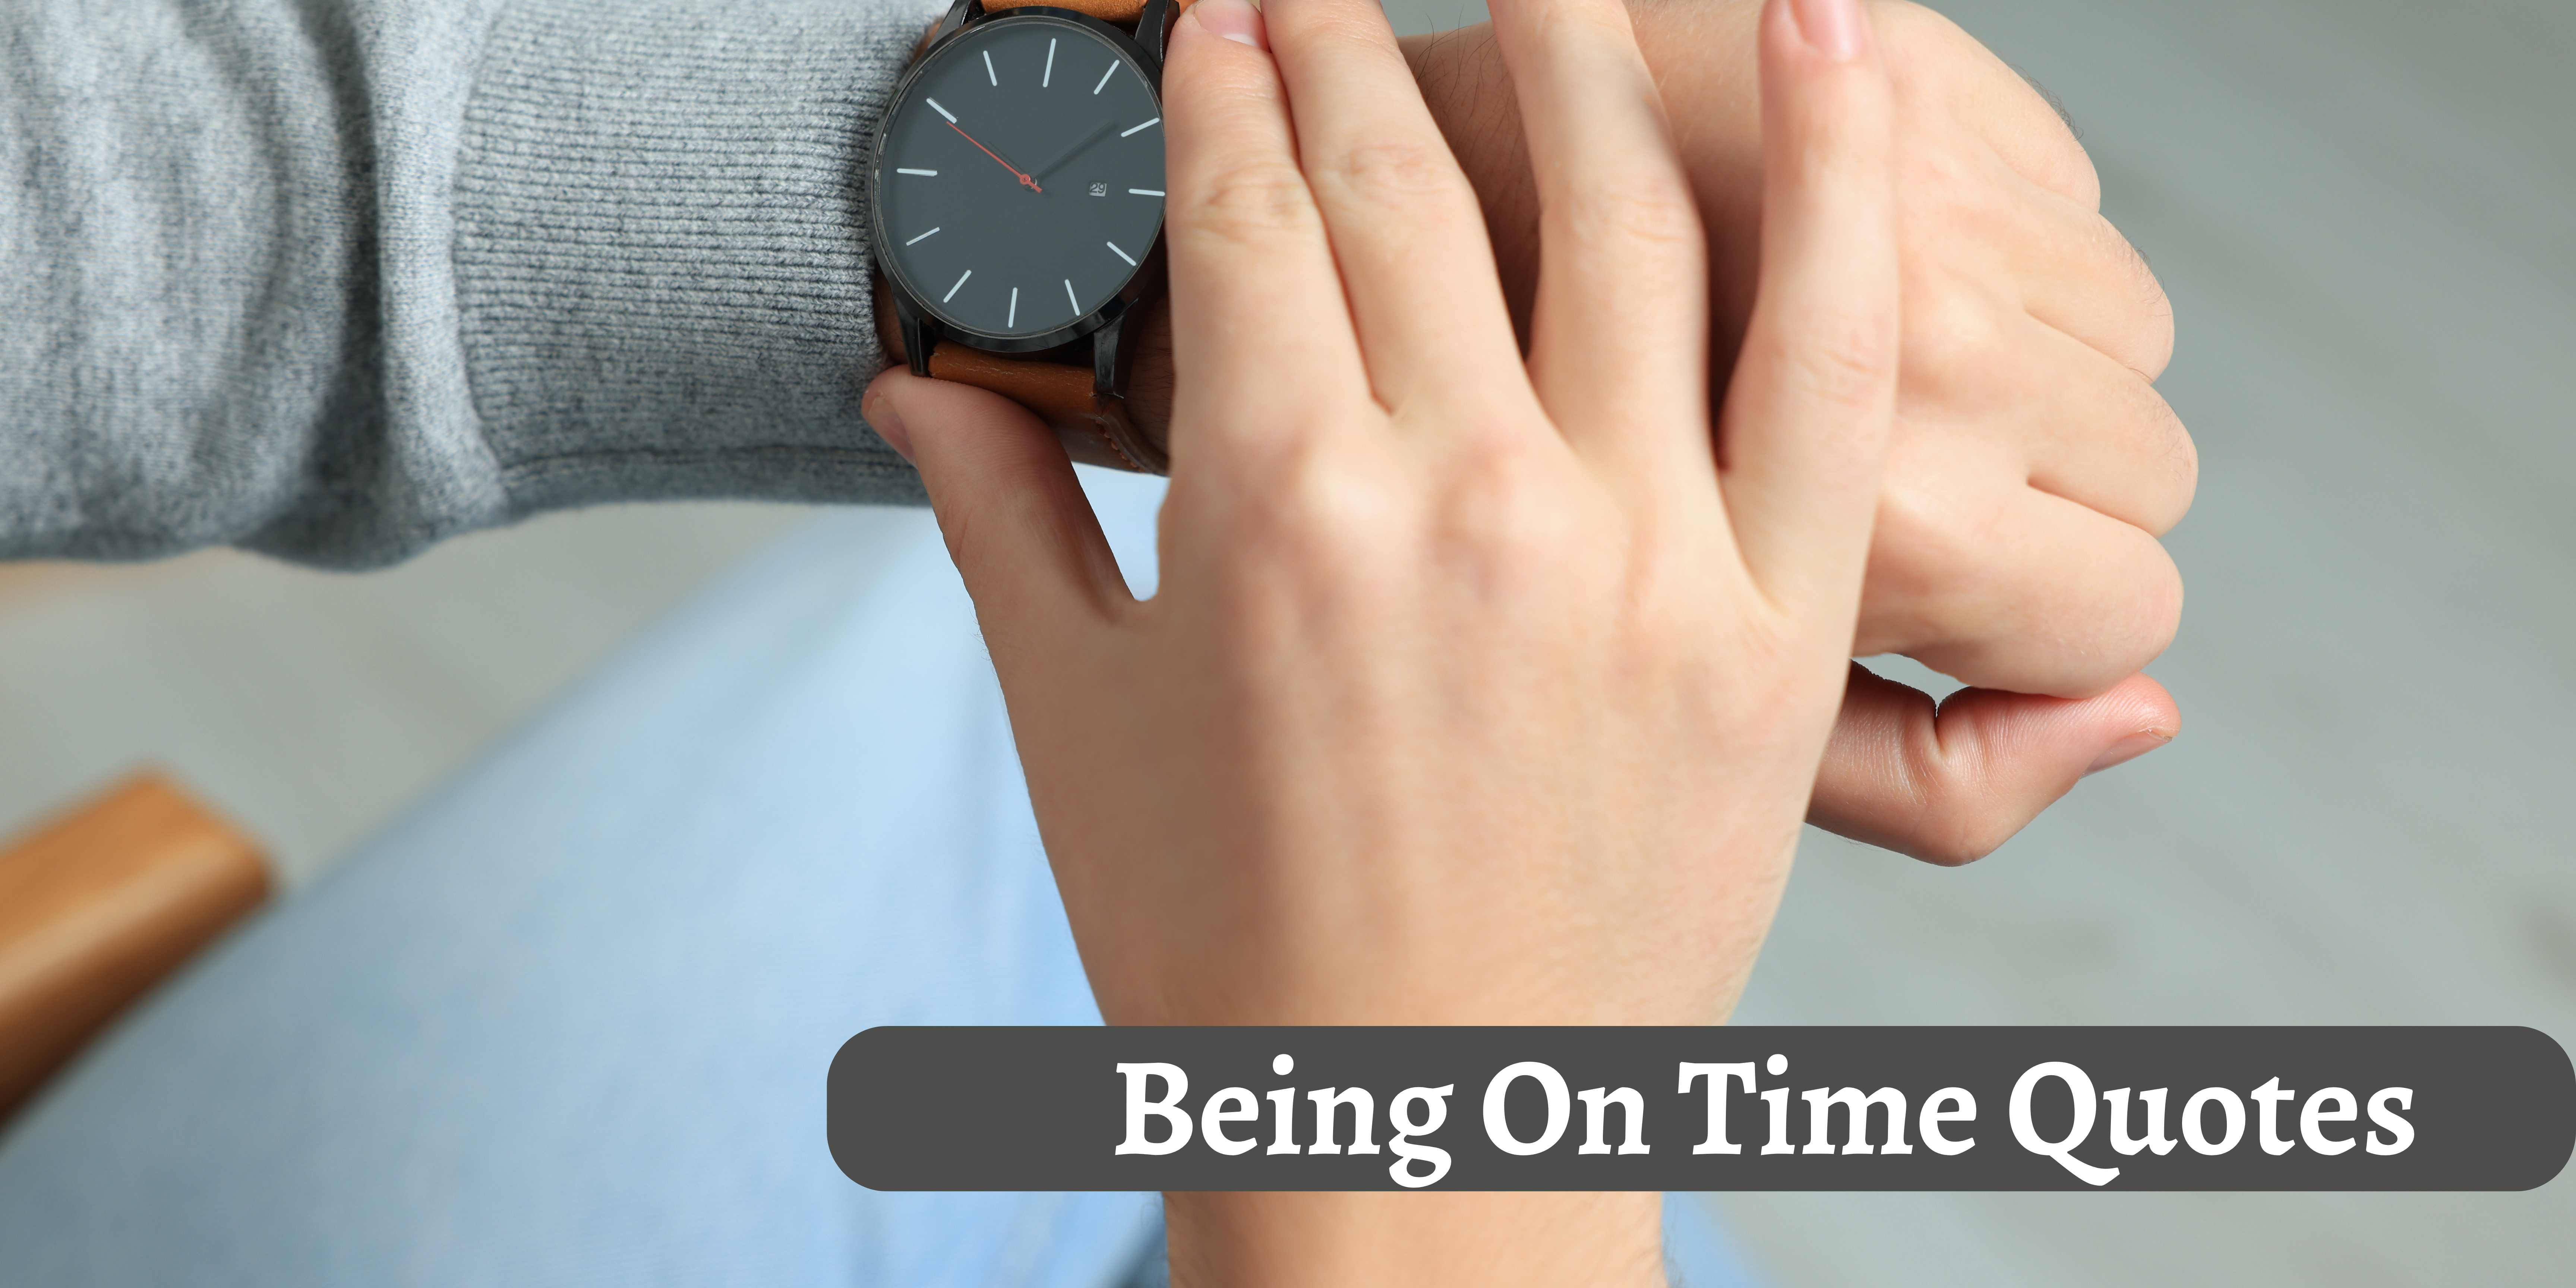 BEING ON TIME QUOTES